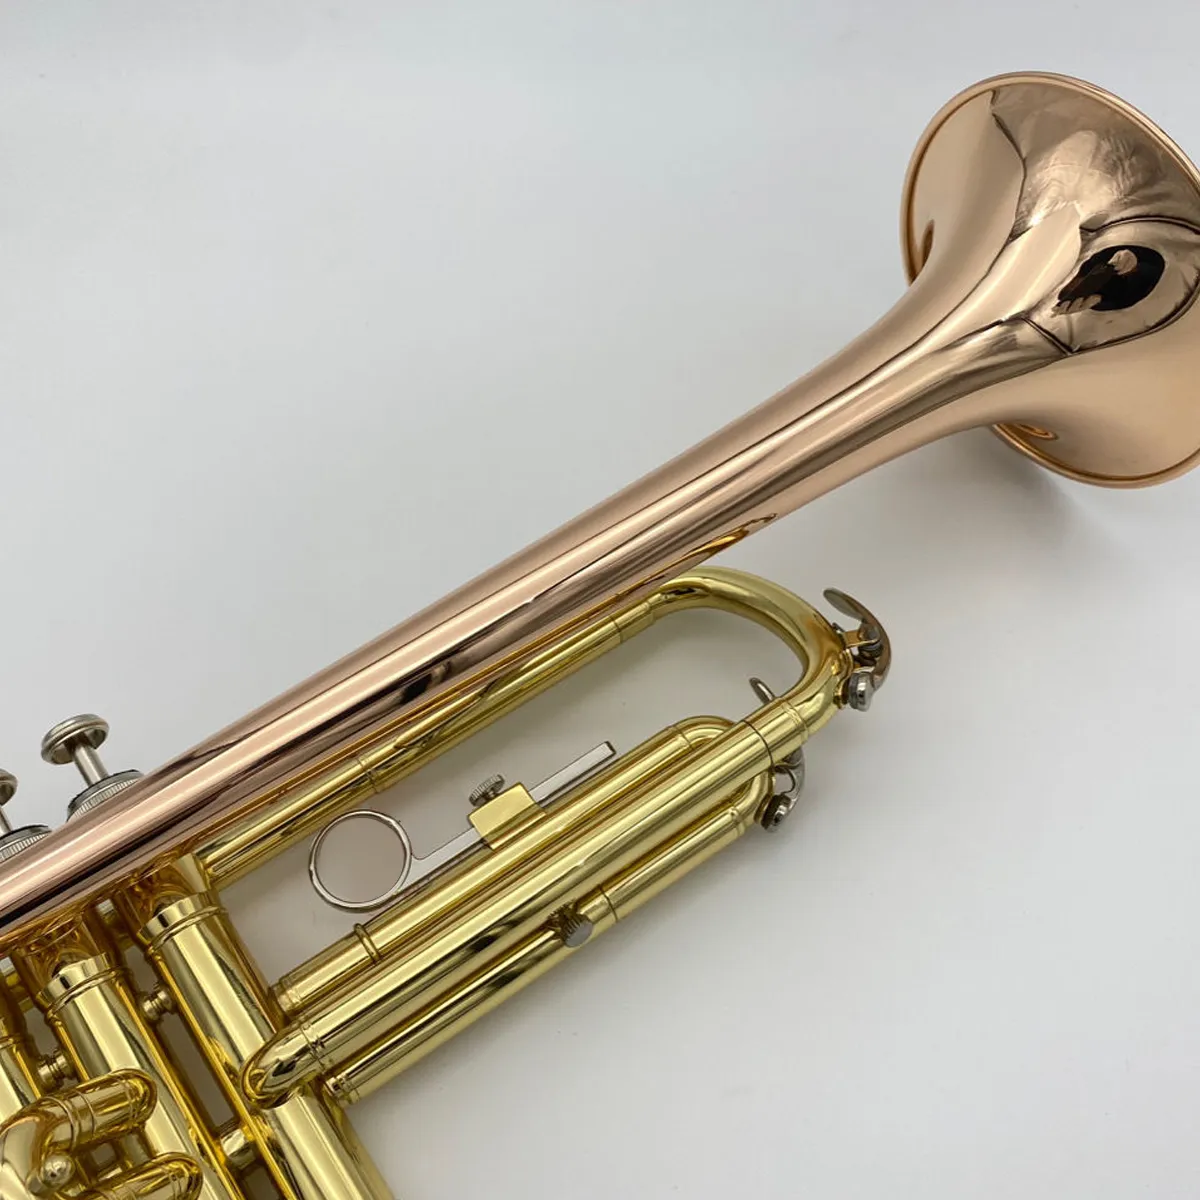 Highquality professional trumpet instrument for beginners to play goldplated phosphor bronze reverse grip lefthand trumpet3966259